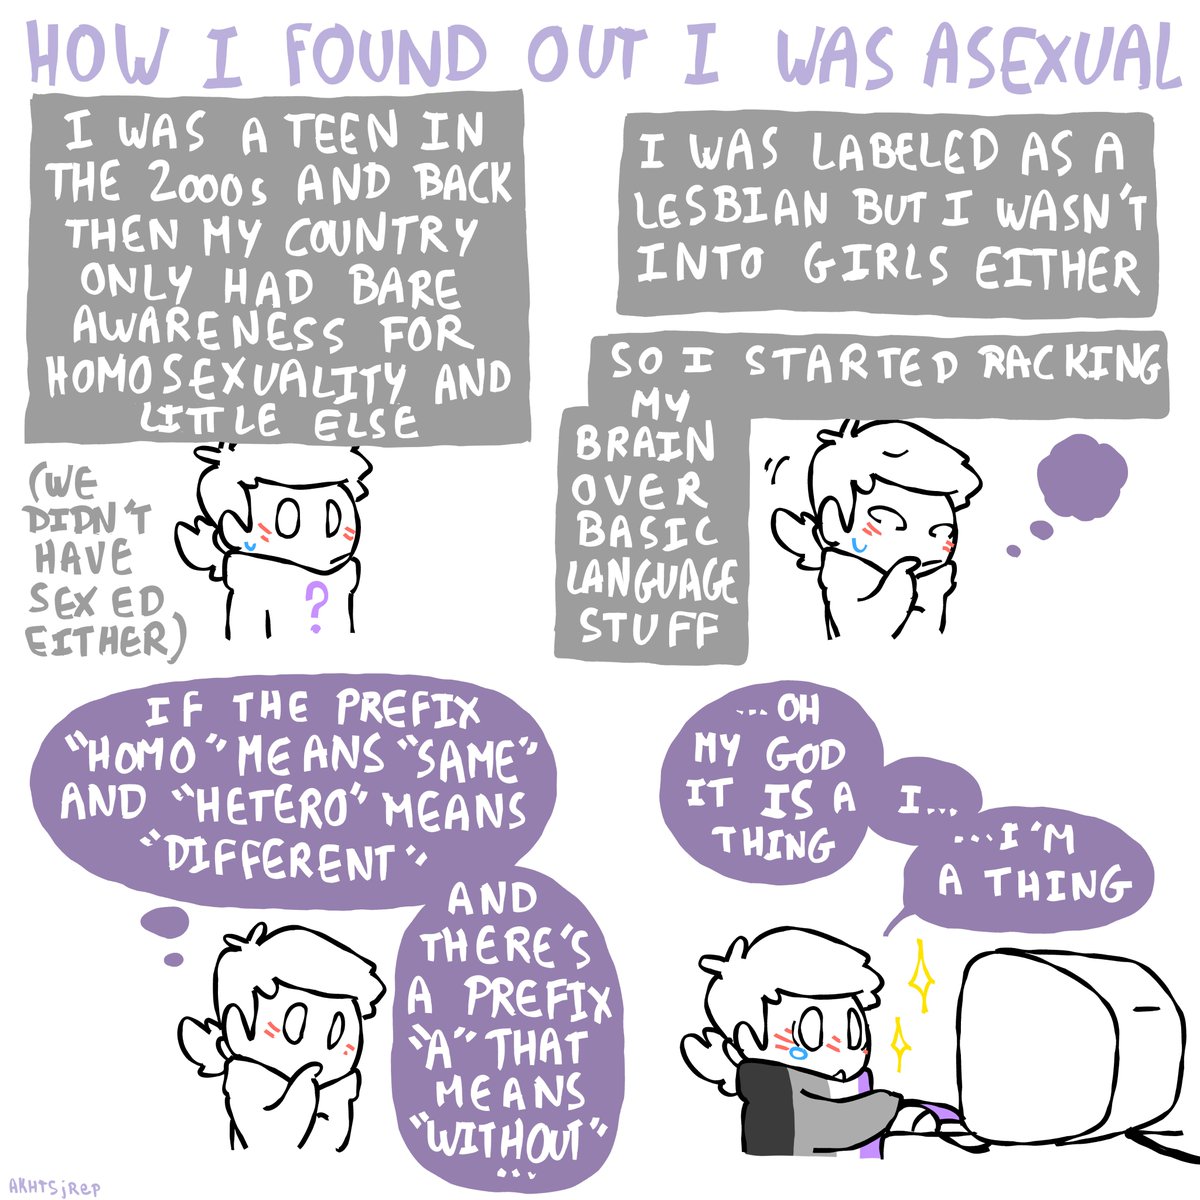 #asexual storytime of the day I guess

#acespeccomicshare #acecreativity #PrideMonth